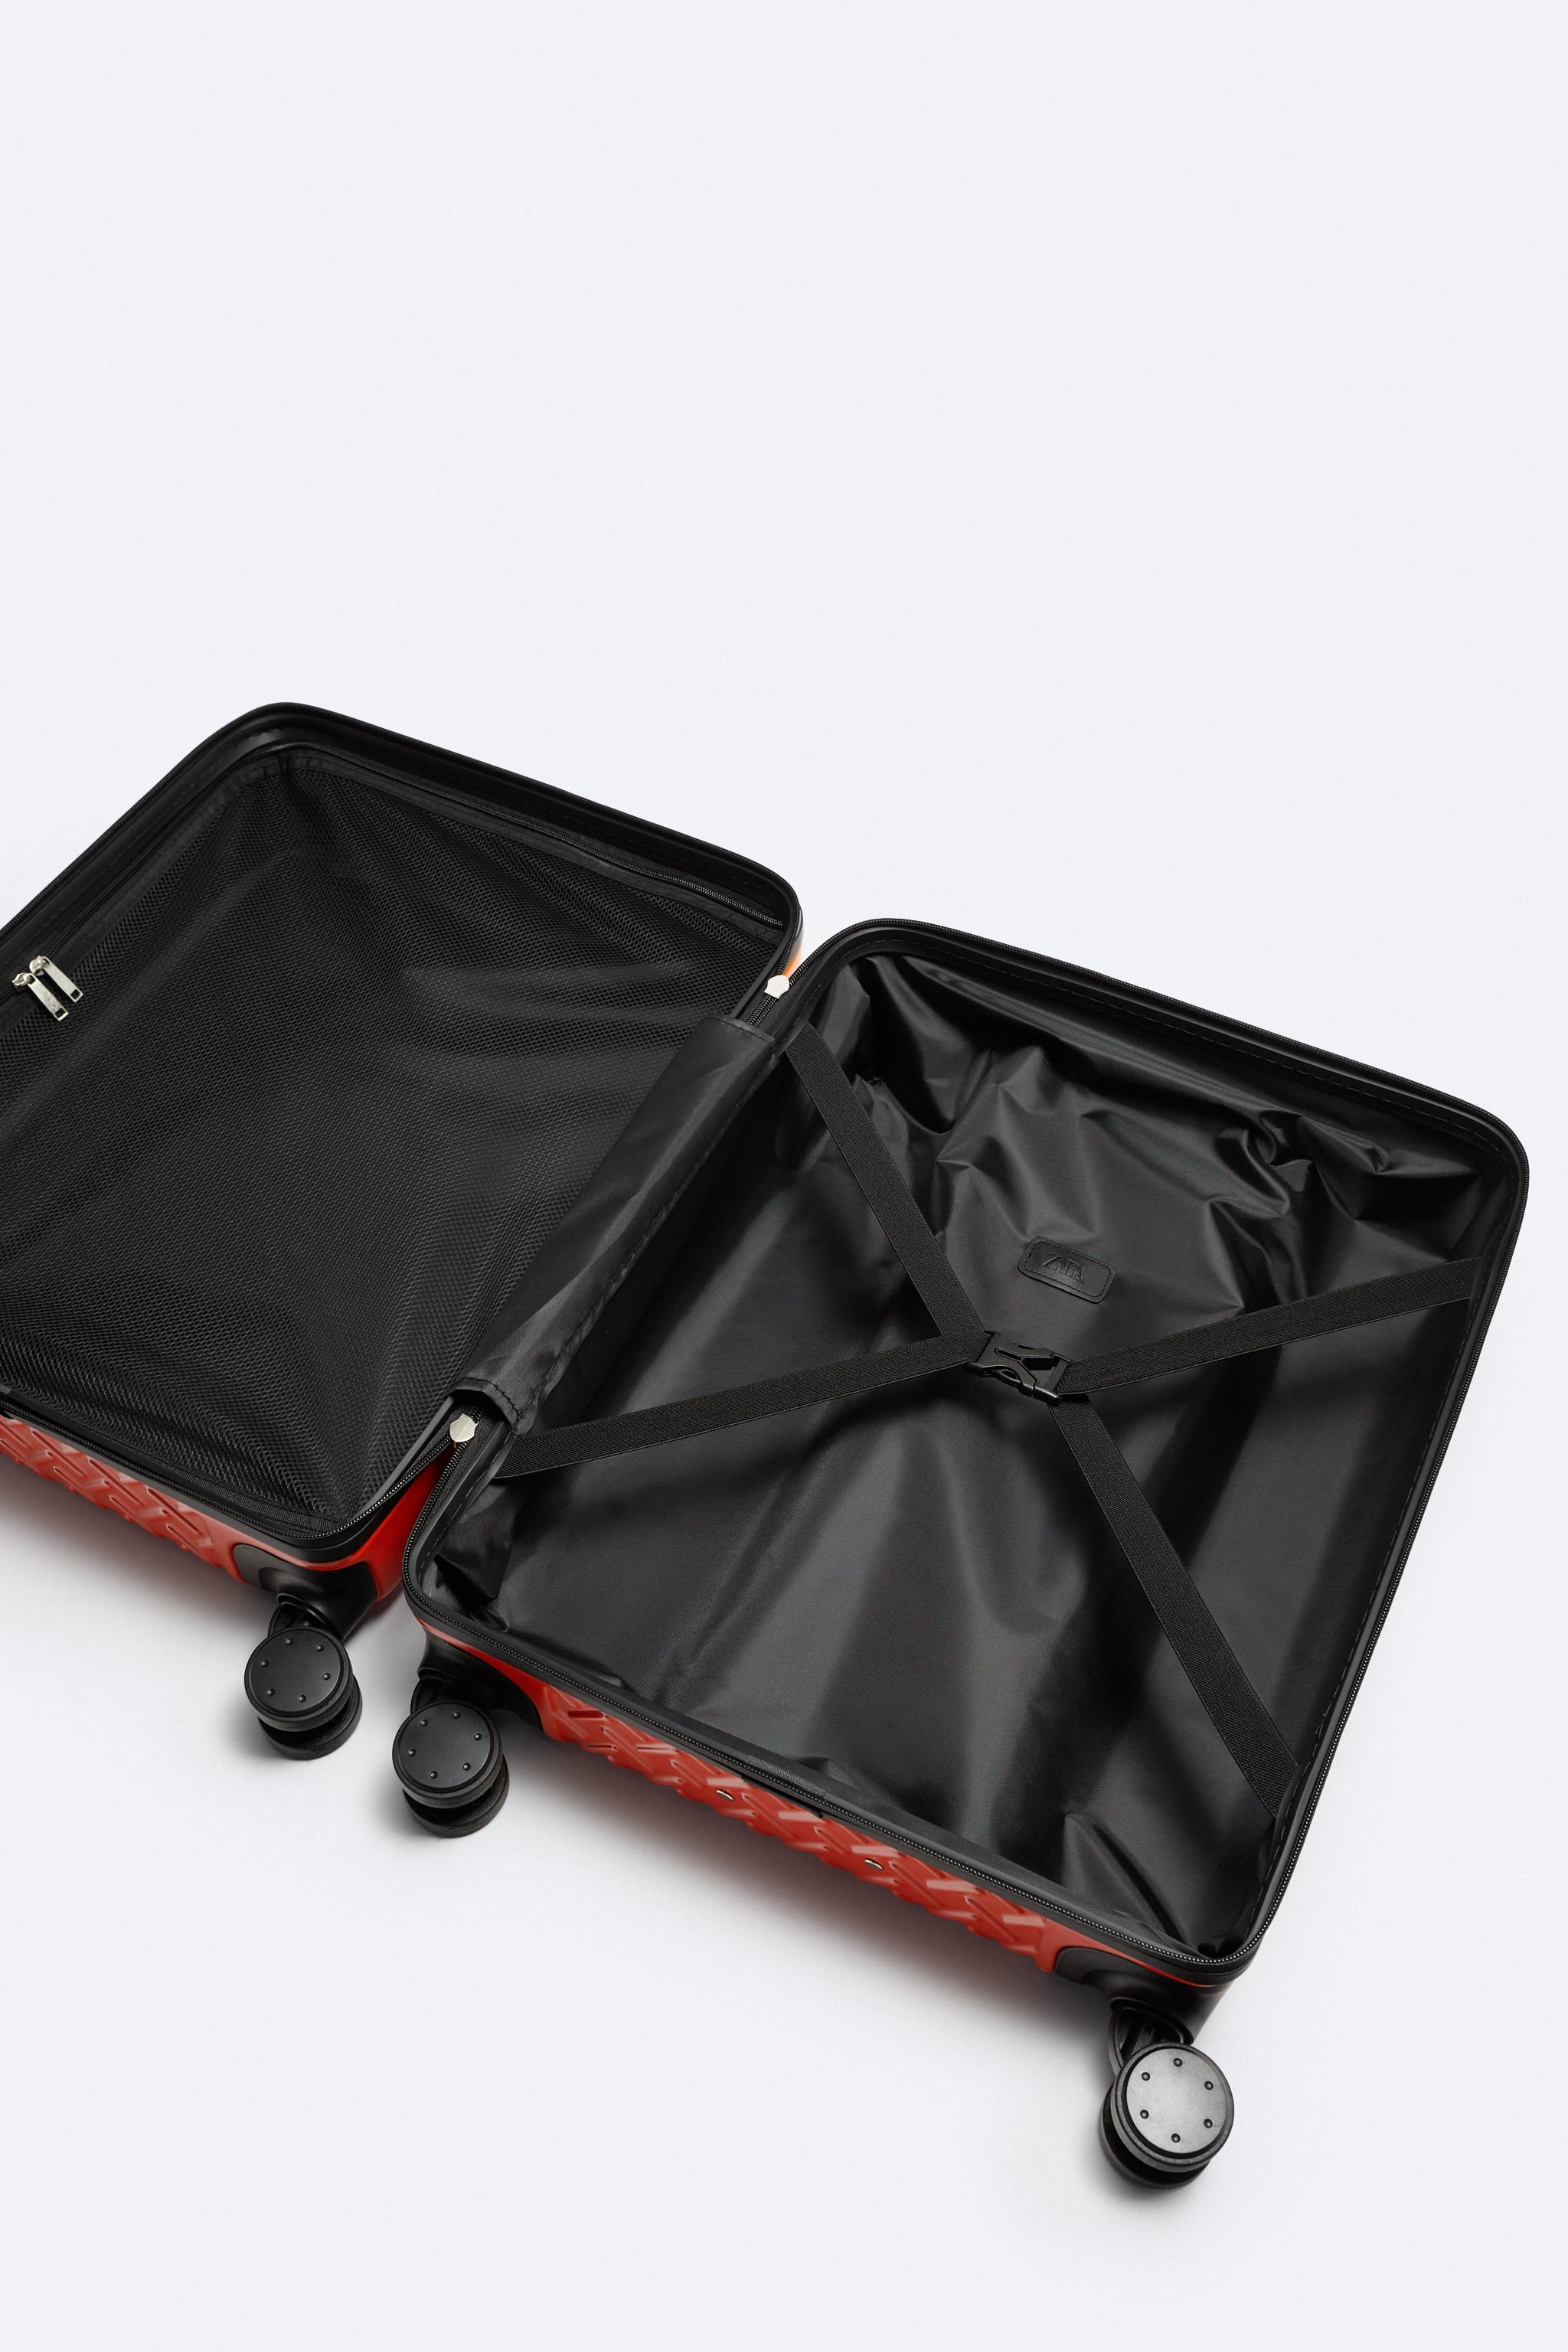 HARDSIDE CARRY-ON SPINNER LUGGAGE